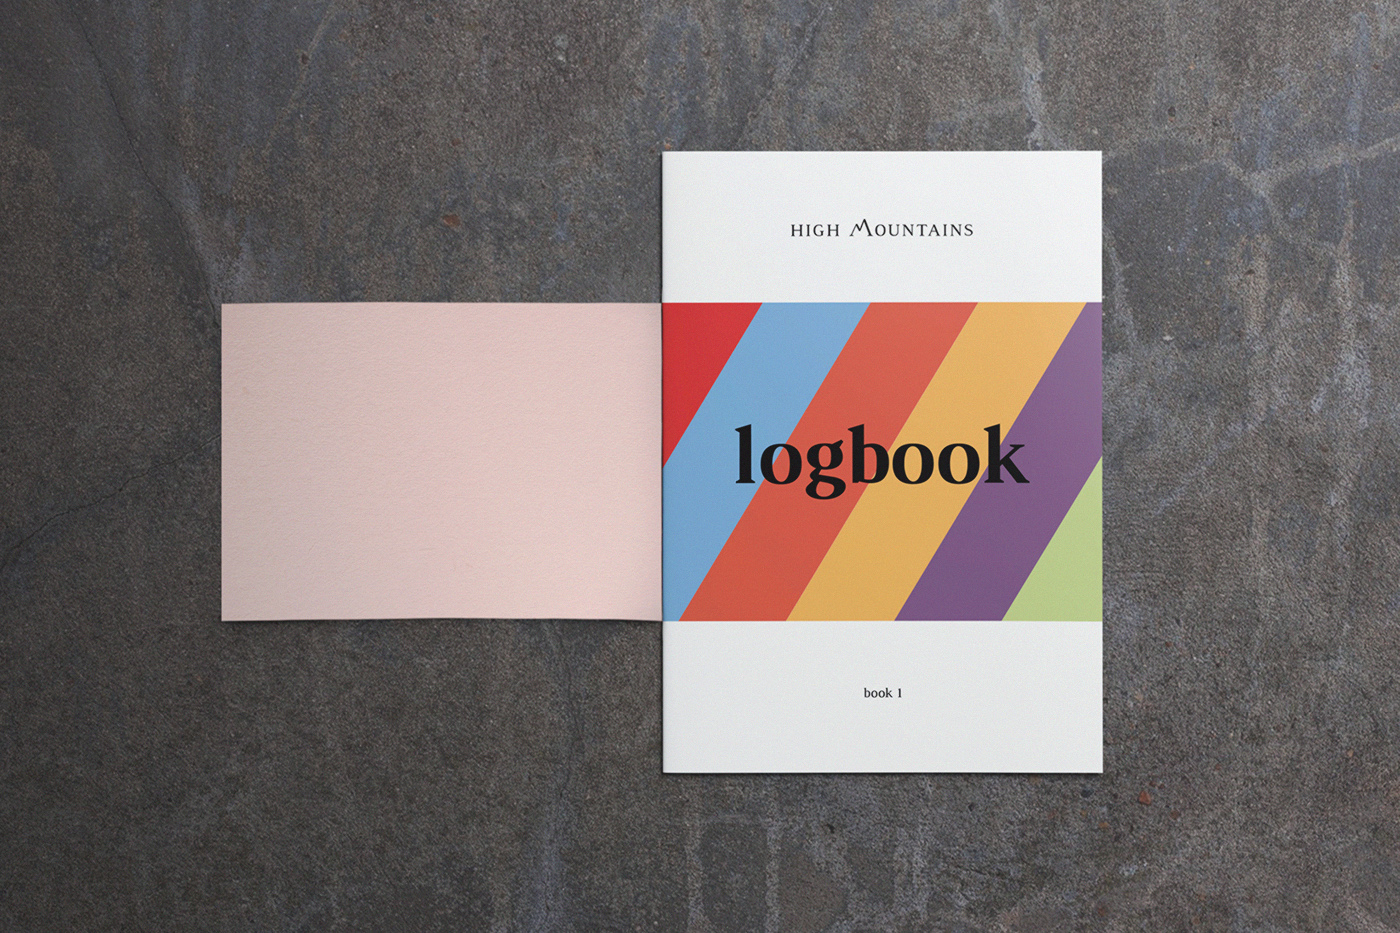 HMR Logbook cover opened